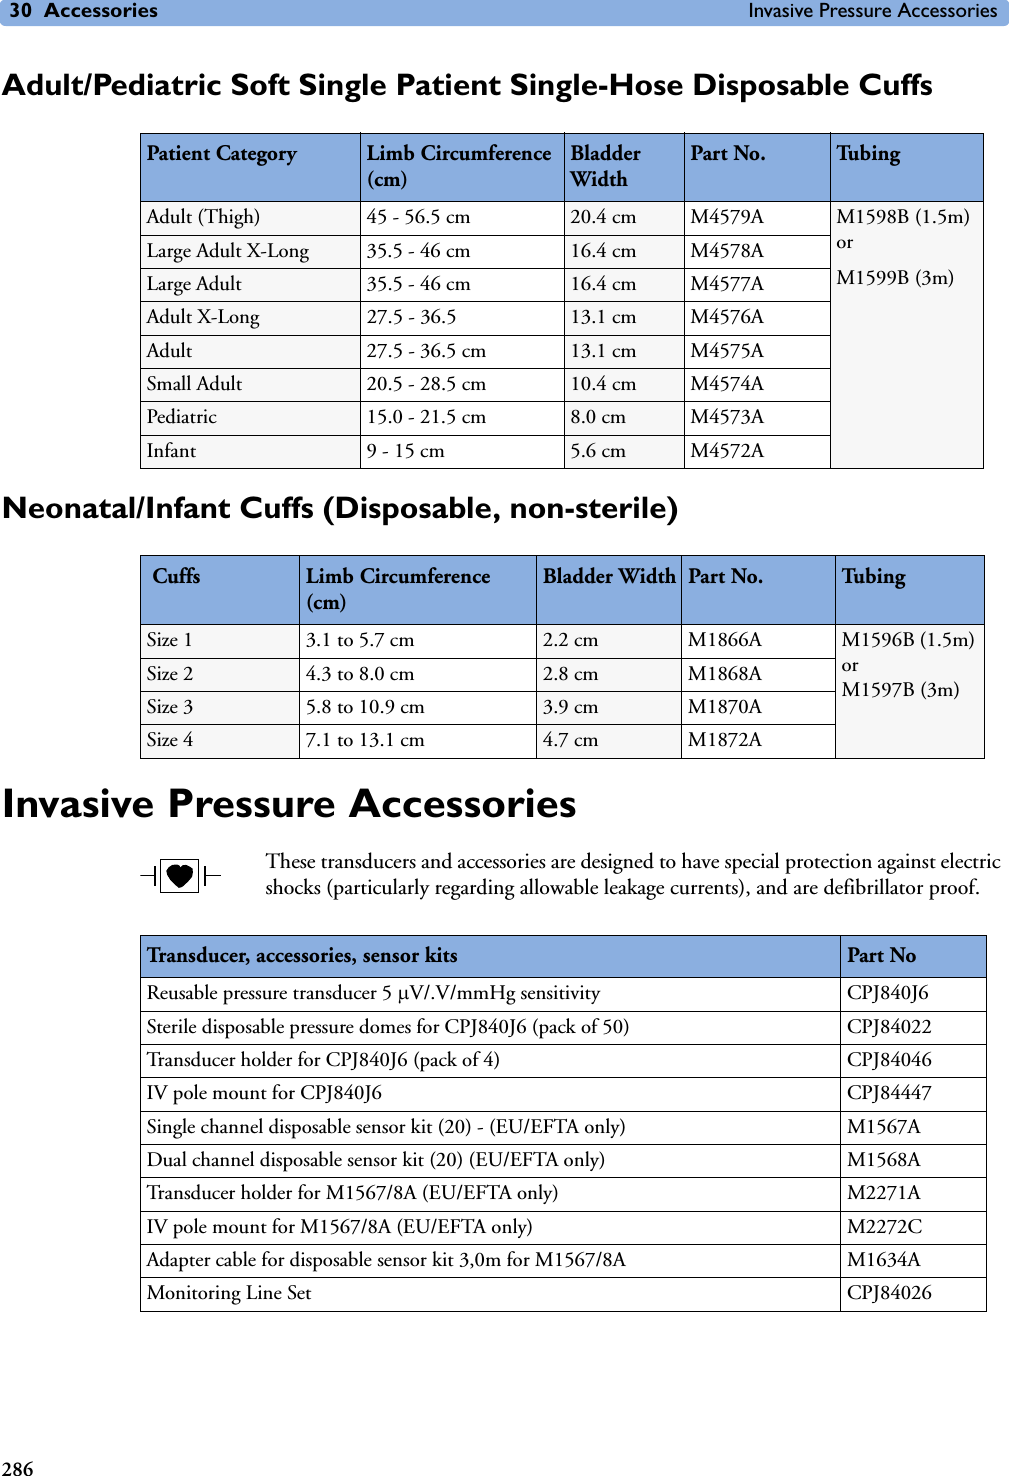 30 Accessories Invasive Pressure Accessories286Adult/Pediatric Soft Single Patient Single-Hose Disposable CuffsNeonatal/Infant Cuffs (Disposable, non-sterile)Invasive Pressure AccessoriesThese transducers and accessories are designed to have special protection against electric shocks (particularly regarding allowable leakage currents), and are defibrillator proof.Patient Category Limb Circumference (cm)Bladder WidthPart No.  Tu b i n gAdult (Thigh) 45 - 56.5 cm 20.4 cm M4579A M1598B (1.5m) or M1599B (3m)Large Adult X-Long 35.5 - 46 cm 16.4 cm M4578ALarge Adult 35.5 - 46 cm 16.4 cm M4577AAdult X-Long 27.5 - 36.5 13.1 cm M4576AAdult 27.5 - 36.5 cm 13.1 cm M4575ASmall Adult 20.5 - 28.5 cm 10.4 cm M4574APediatric 15.0 - 21.5 cm 8.0 cm M4573AInfant 9 - 15 cm 5.6 cm M4572A Cuffs Limb Circumference (cm)Bladder Width Part No.  Tu b i n gSize 1 3.1 to 5.7 cm 2.2 cm M1866A M1596B (1.5m) or M1597B (3m)Size 2 4.3 to 8.0 cm 2.8 cm M1868ASize 3 5.8 to 10.9 cm 3.9 cm M1870ASize 4 7.1 to 13.1 cm 4.7 cm M1872ATransducer, accessories, sensor kits Part NoReusable pressure transducer 5 V/.V/mmHg sensitivity CPJ840J6Sterile disposable pressure domes for CPJ840J6 (pack of 50) CPJ84022Transducer holder for CPJ840J6 (pack of 4) CPJ84046IV pole mount for CPJ840J6 CPJ84447Single channel disposable sensor kit (20) - (EU/EFTA only) M1567ADual channel disposable sensor kit (20) (EU/EFTA only) M1568ATransducer holder for M1567/8A (EU/EFTA only) M2271AIV pole mount for M1567/8A (EU/EFTA only) M2272CAdapter cable for disposable sensor kit 3,0m for M1567/8A M1634AMonitoring Line Set CPJ84026